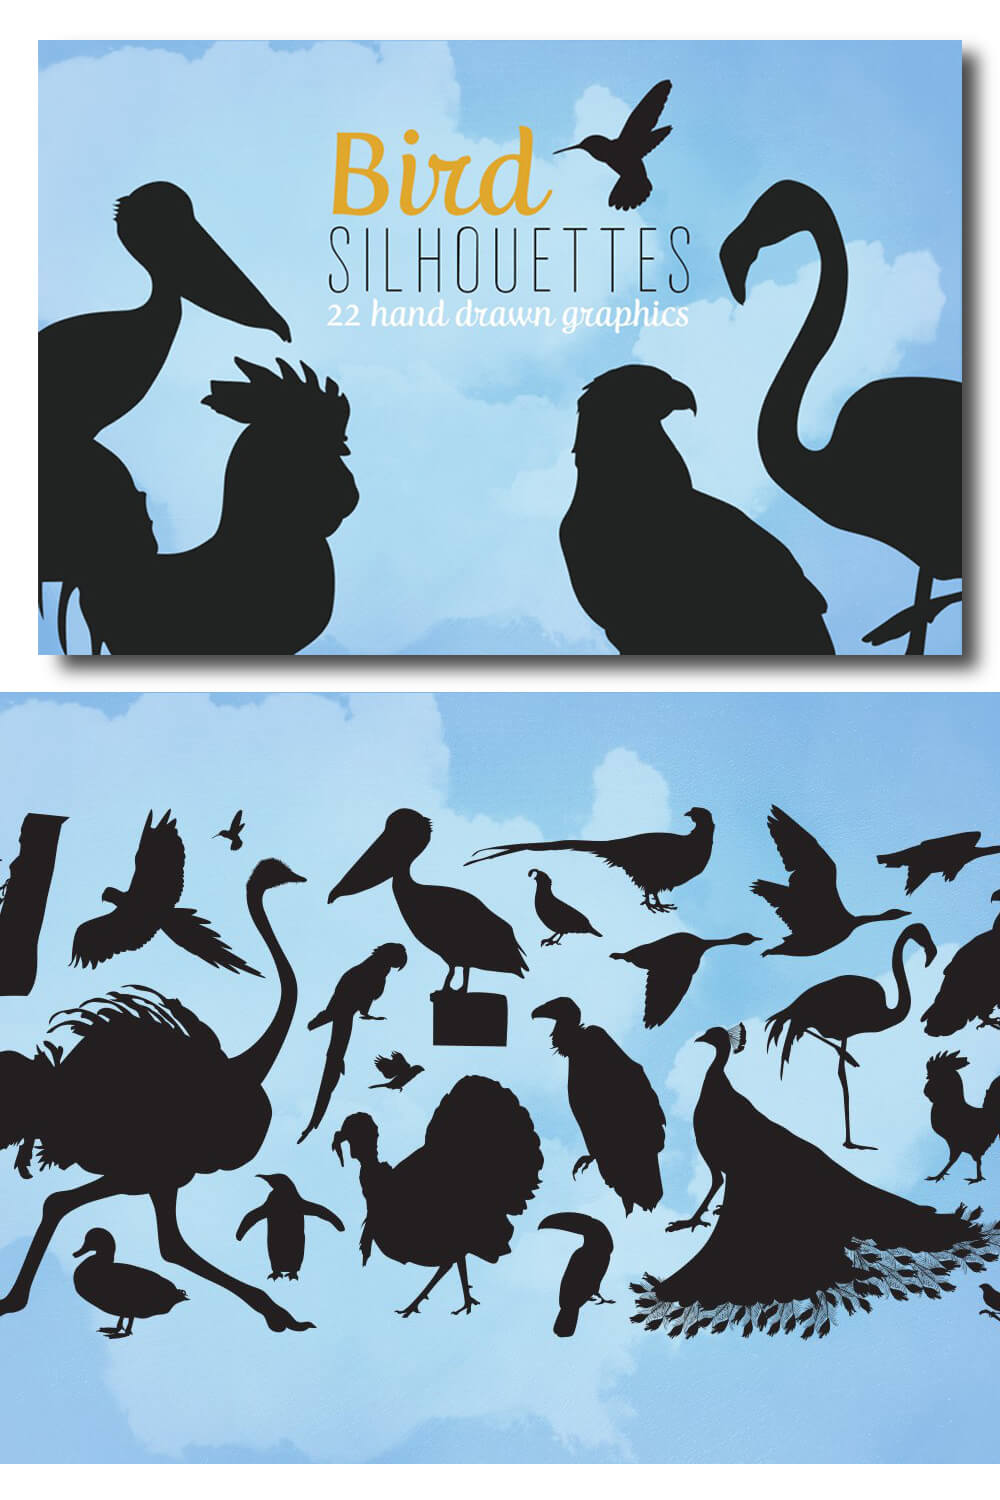 Two slides of bird silhouettes.